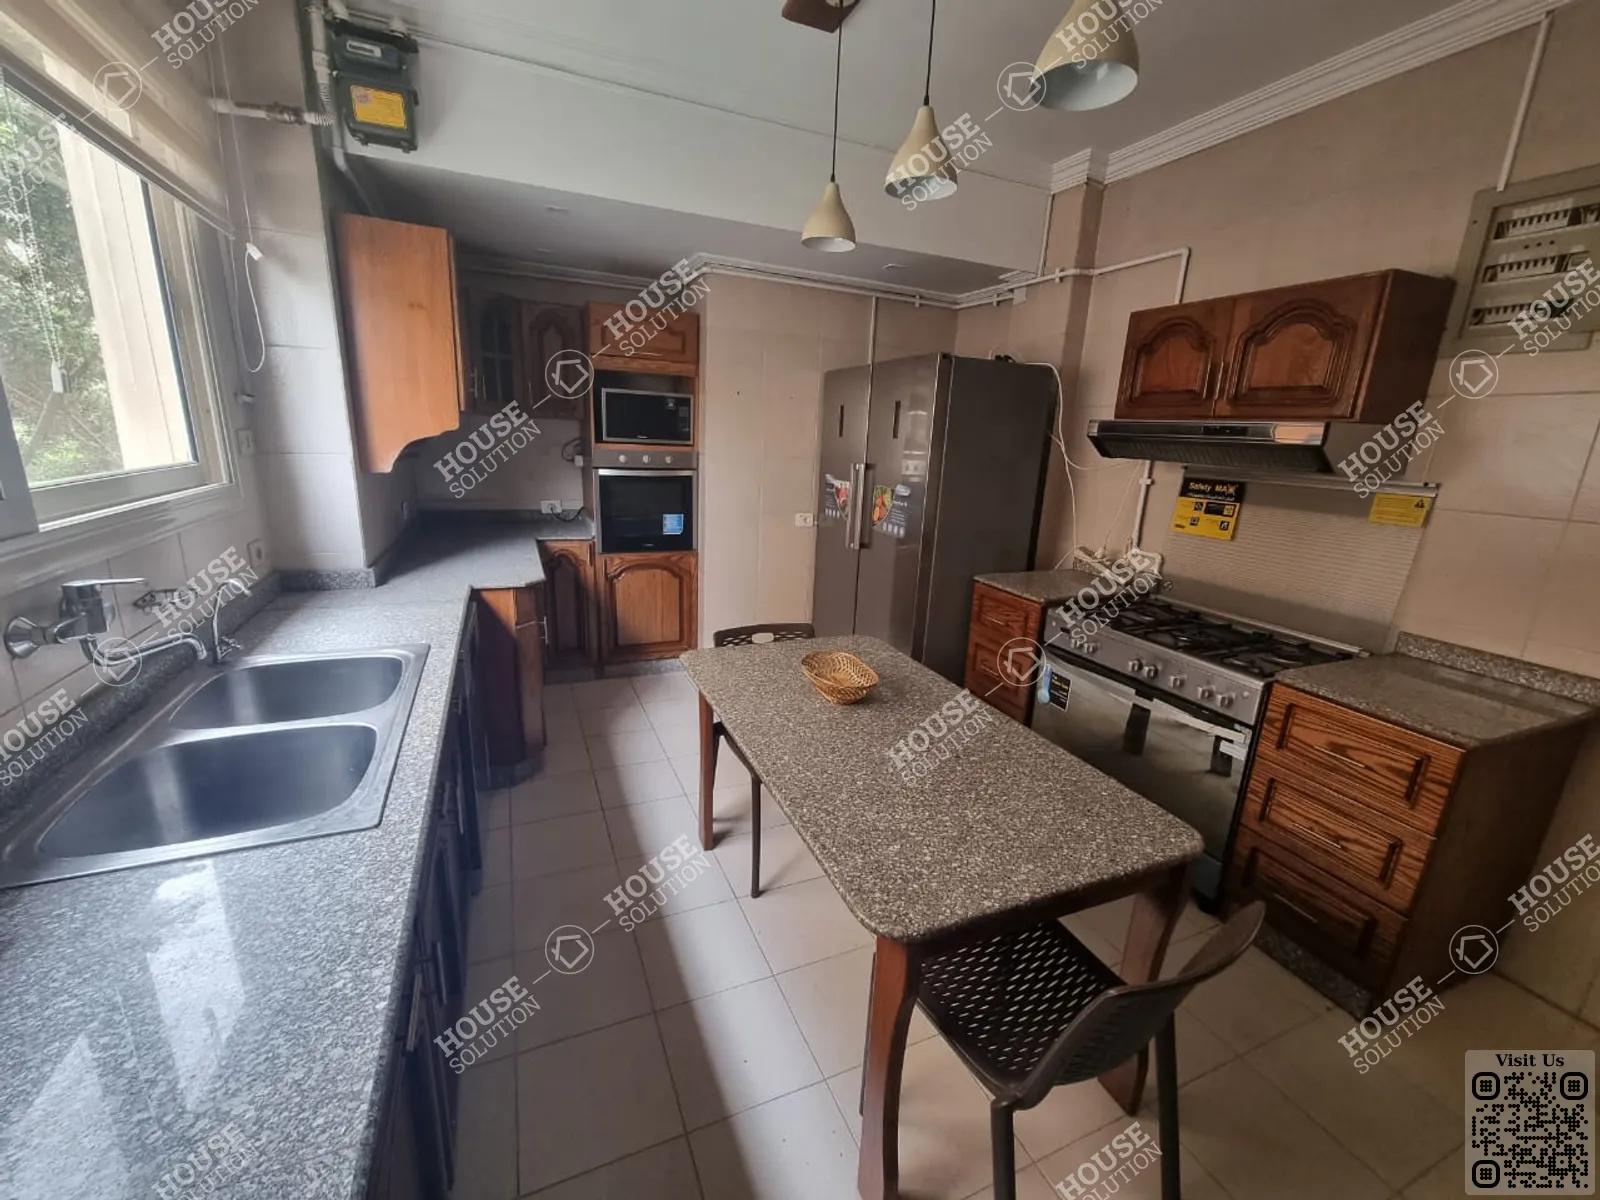 KITCHEN  @ Apartments For Rent In Maadi Maadi Degla Area: 185 m² consists of 4 Bedrooms 2 Bathrooms Furnished 5 stars #5668-1